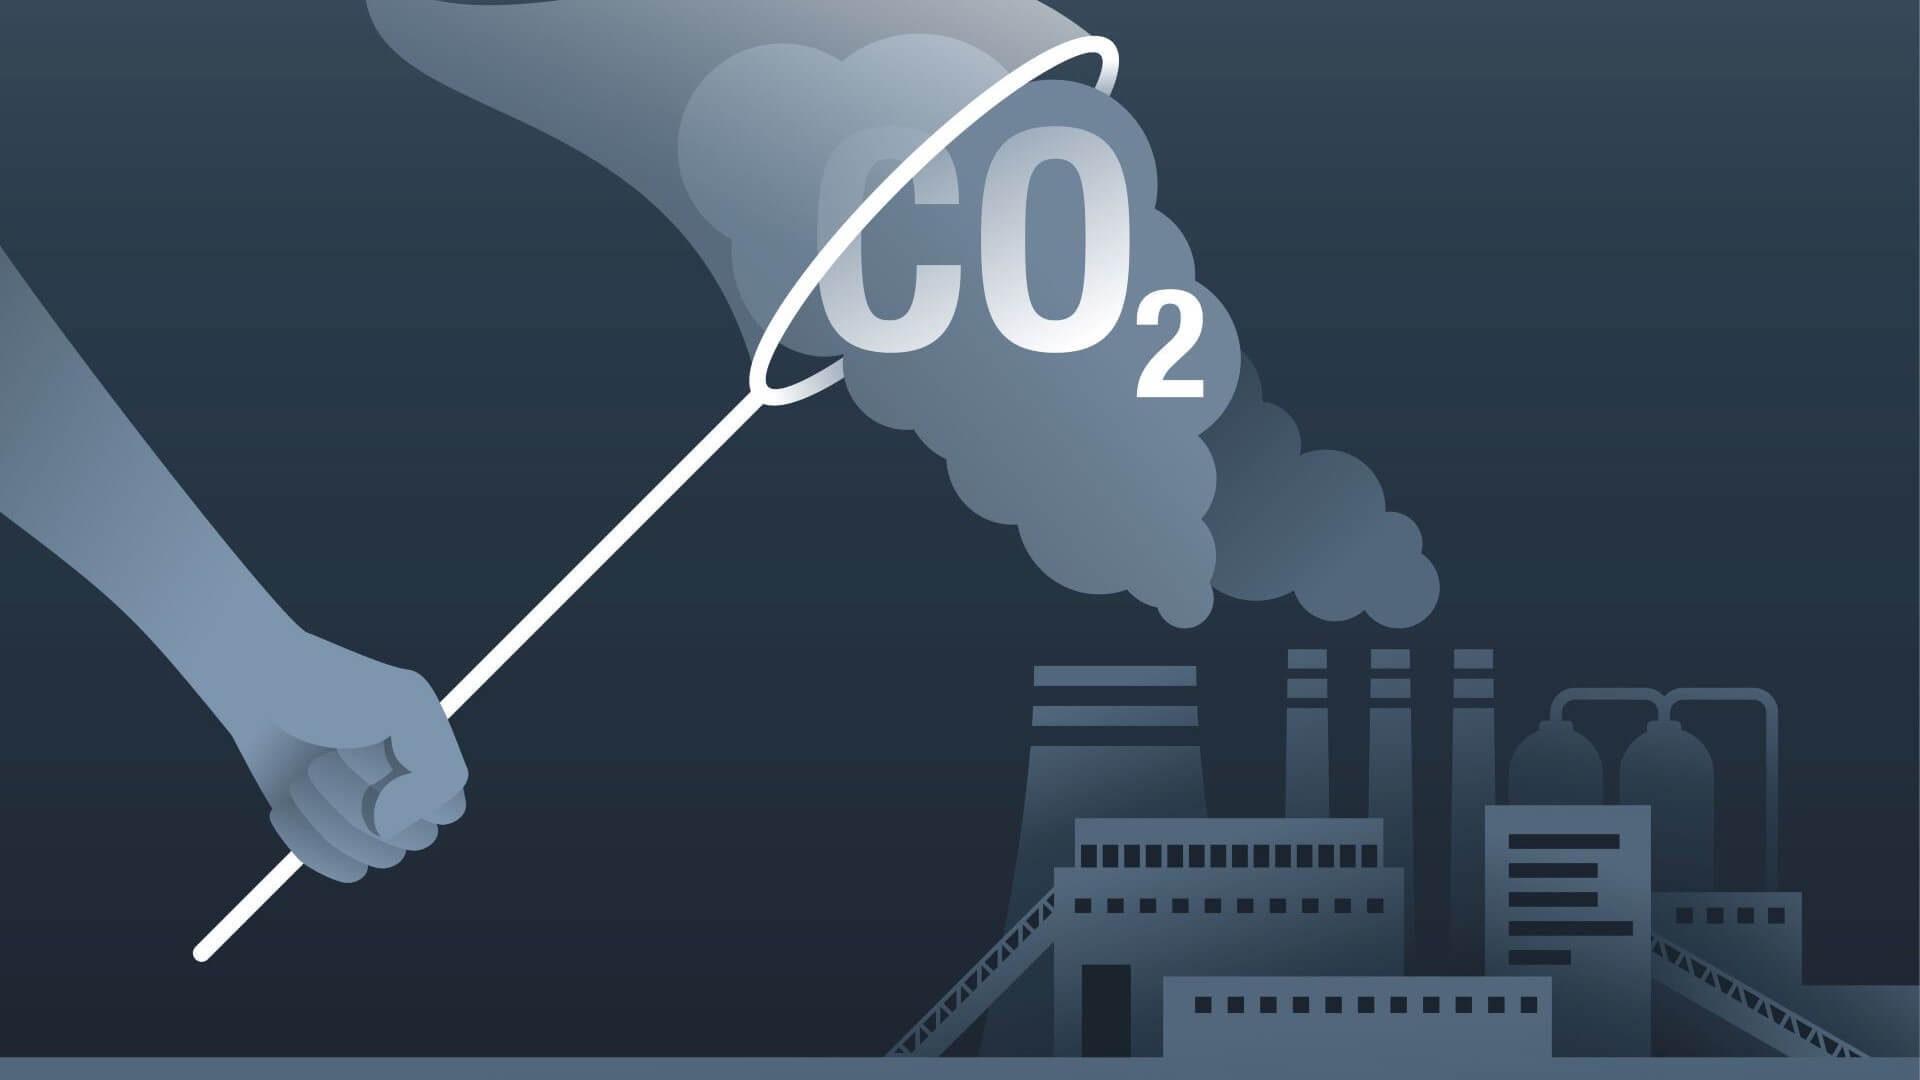 Stylised cartoon graphic of hand holding a butterfly net and capturing a cloud of carbon emissions from industrial buildings